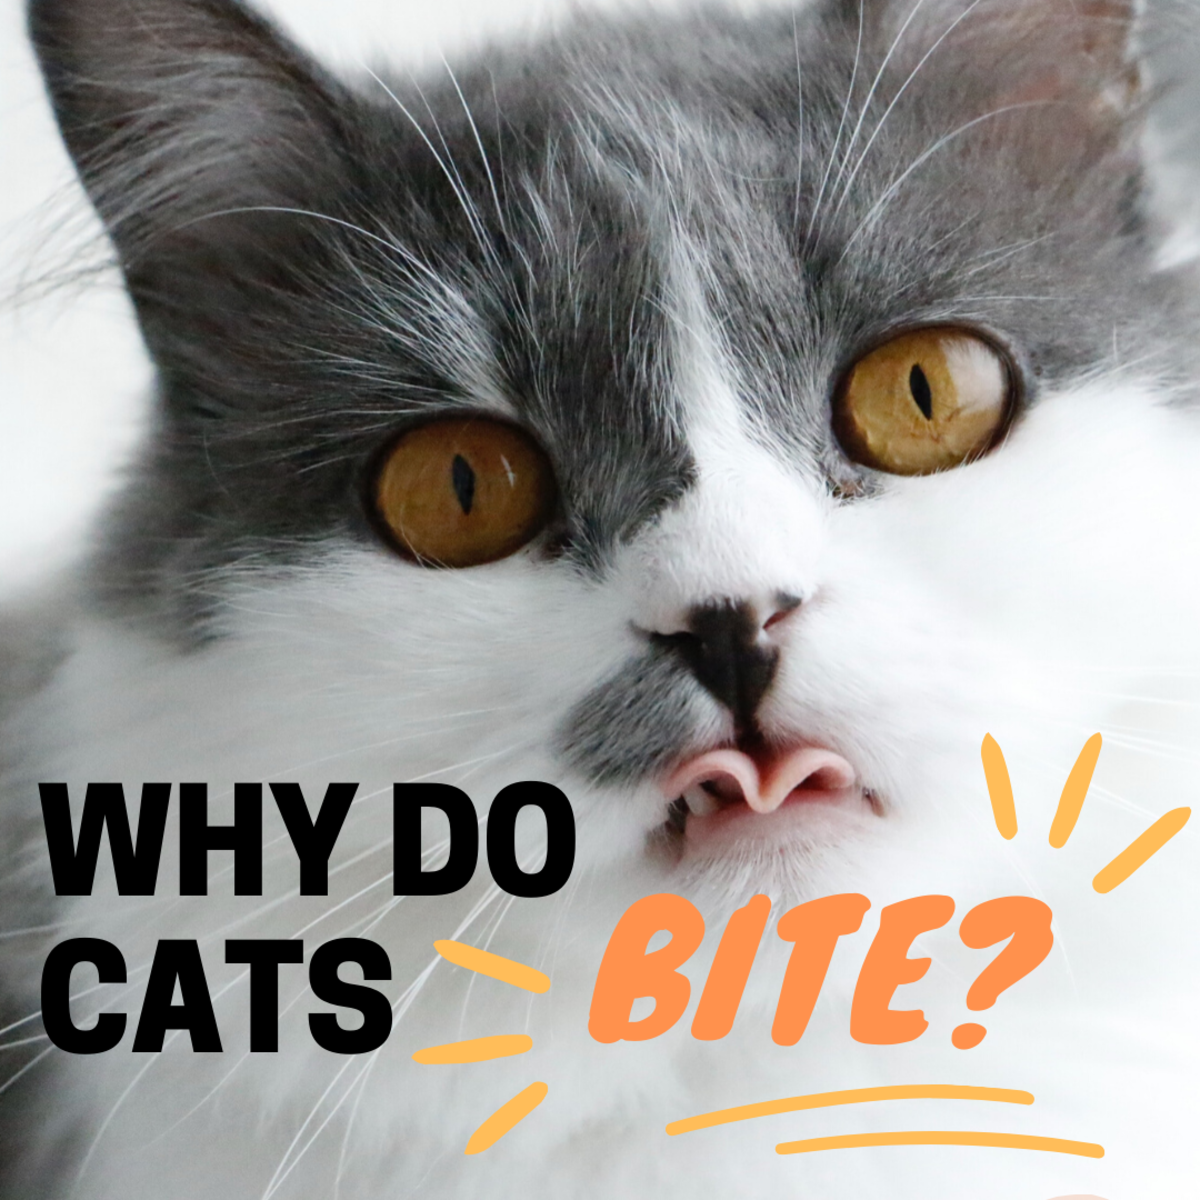 Why Does My Cat Bite?